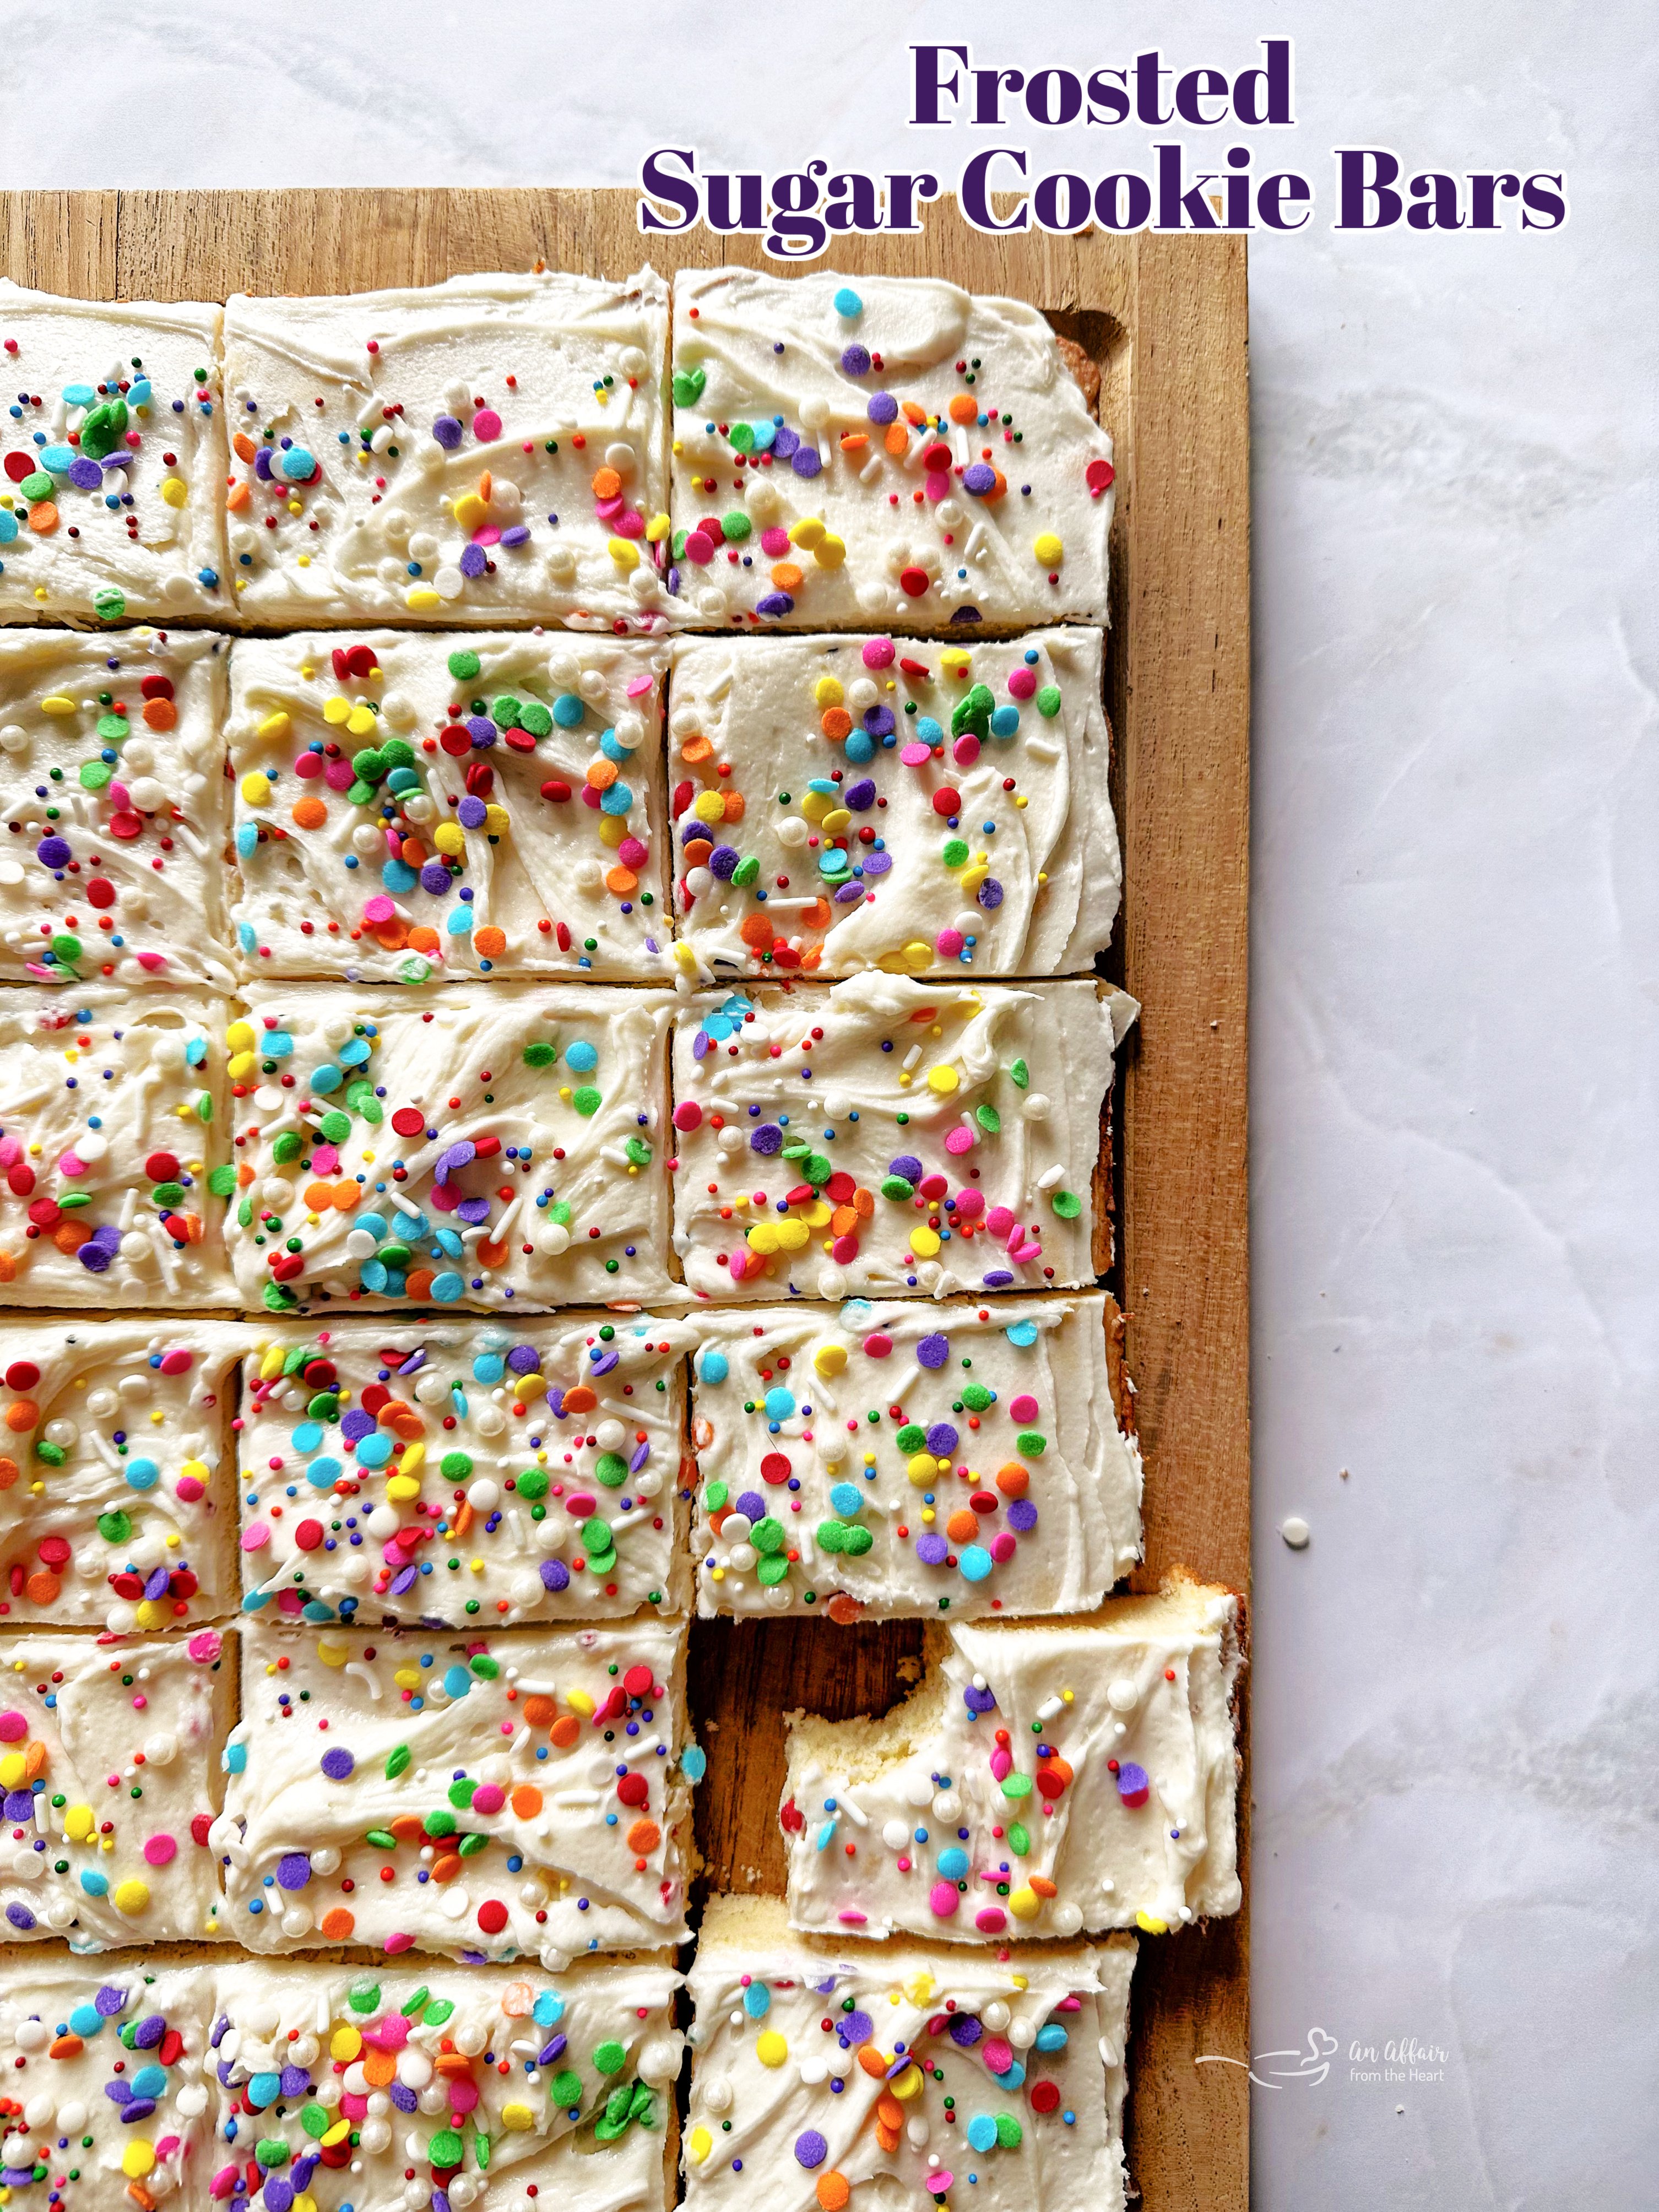 https://anaffairfromtheheart.com/wp-content/uploads/2019/07/Frosted-Sugar-Cookie-Bars-HERO.jpg